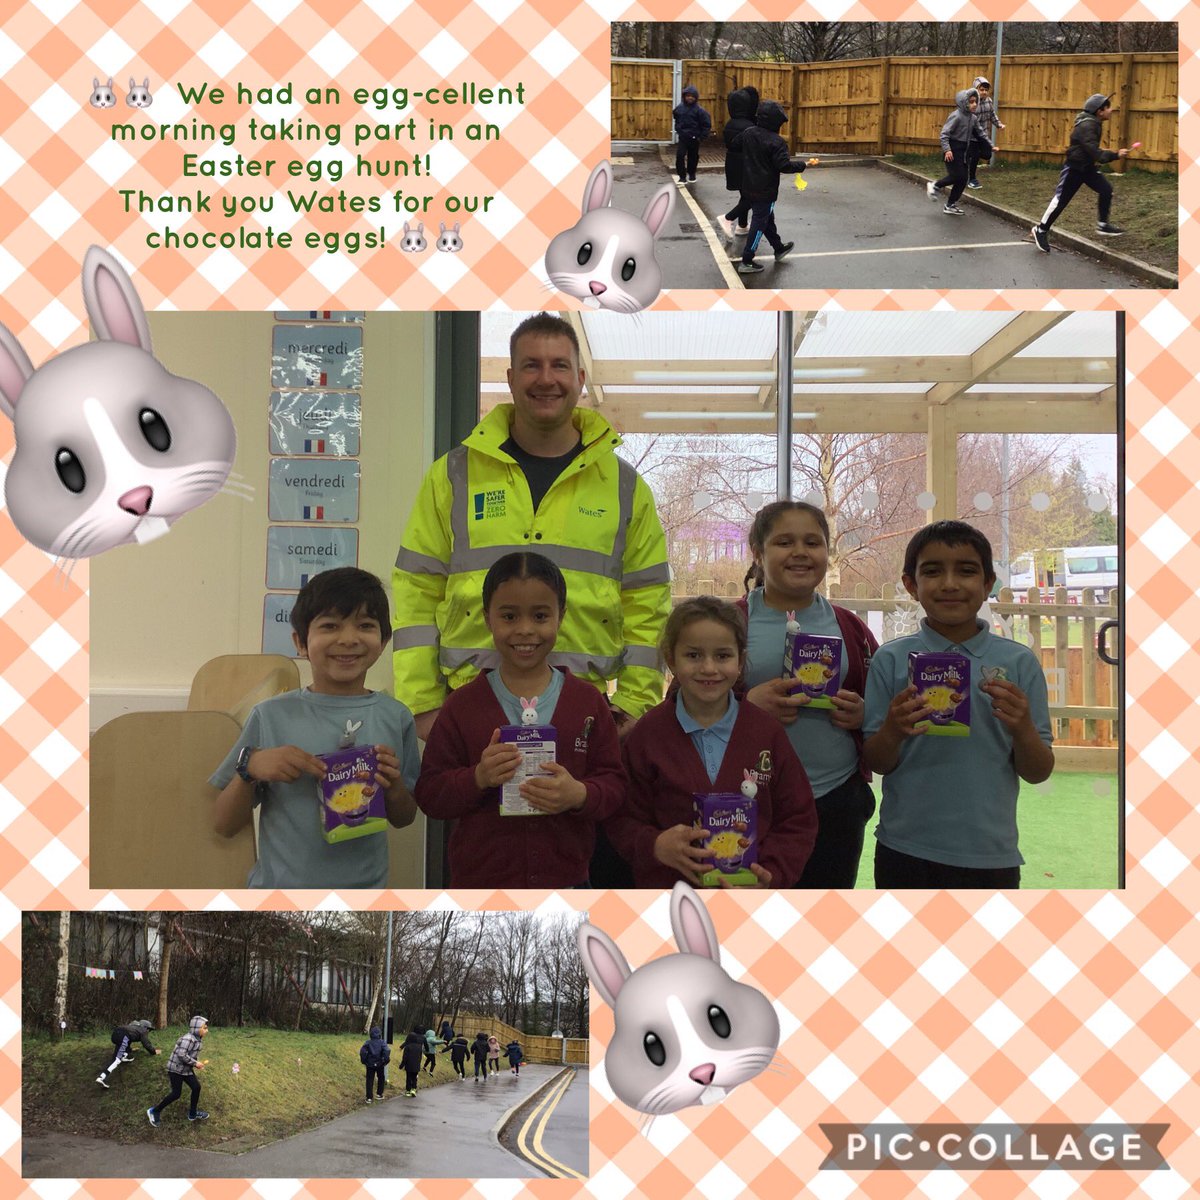 We had an egg-cellent morning taking part in an Easter egg hunt, despite the incredible downpour ☔️ 
Thank you @WatesGroup @JaynespencerC for organising the hunt and presenting the children with Easter eggs and Easter themed craft packs!